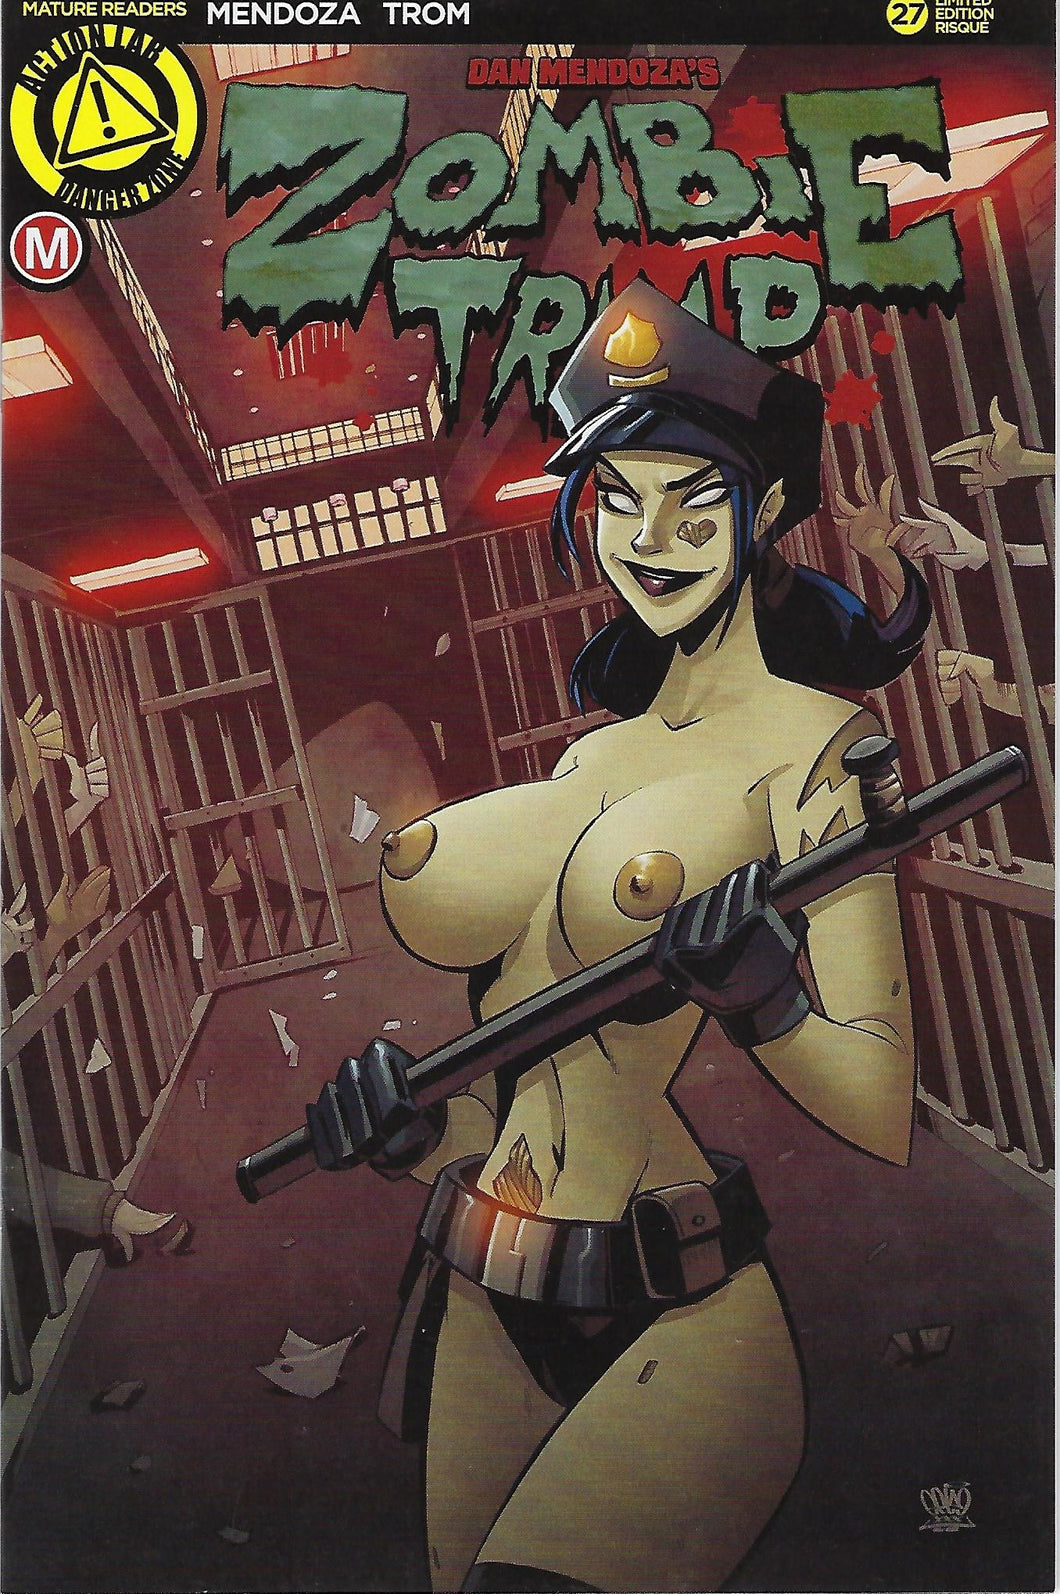 Zombie Tramp # 27 Trom Limited Caged Heat Risque / Topless Variant Cover !!!   VF/NM